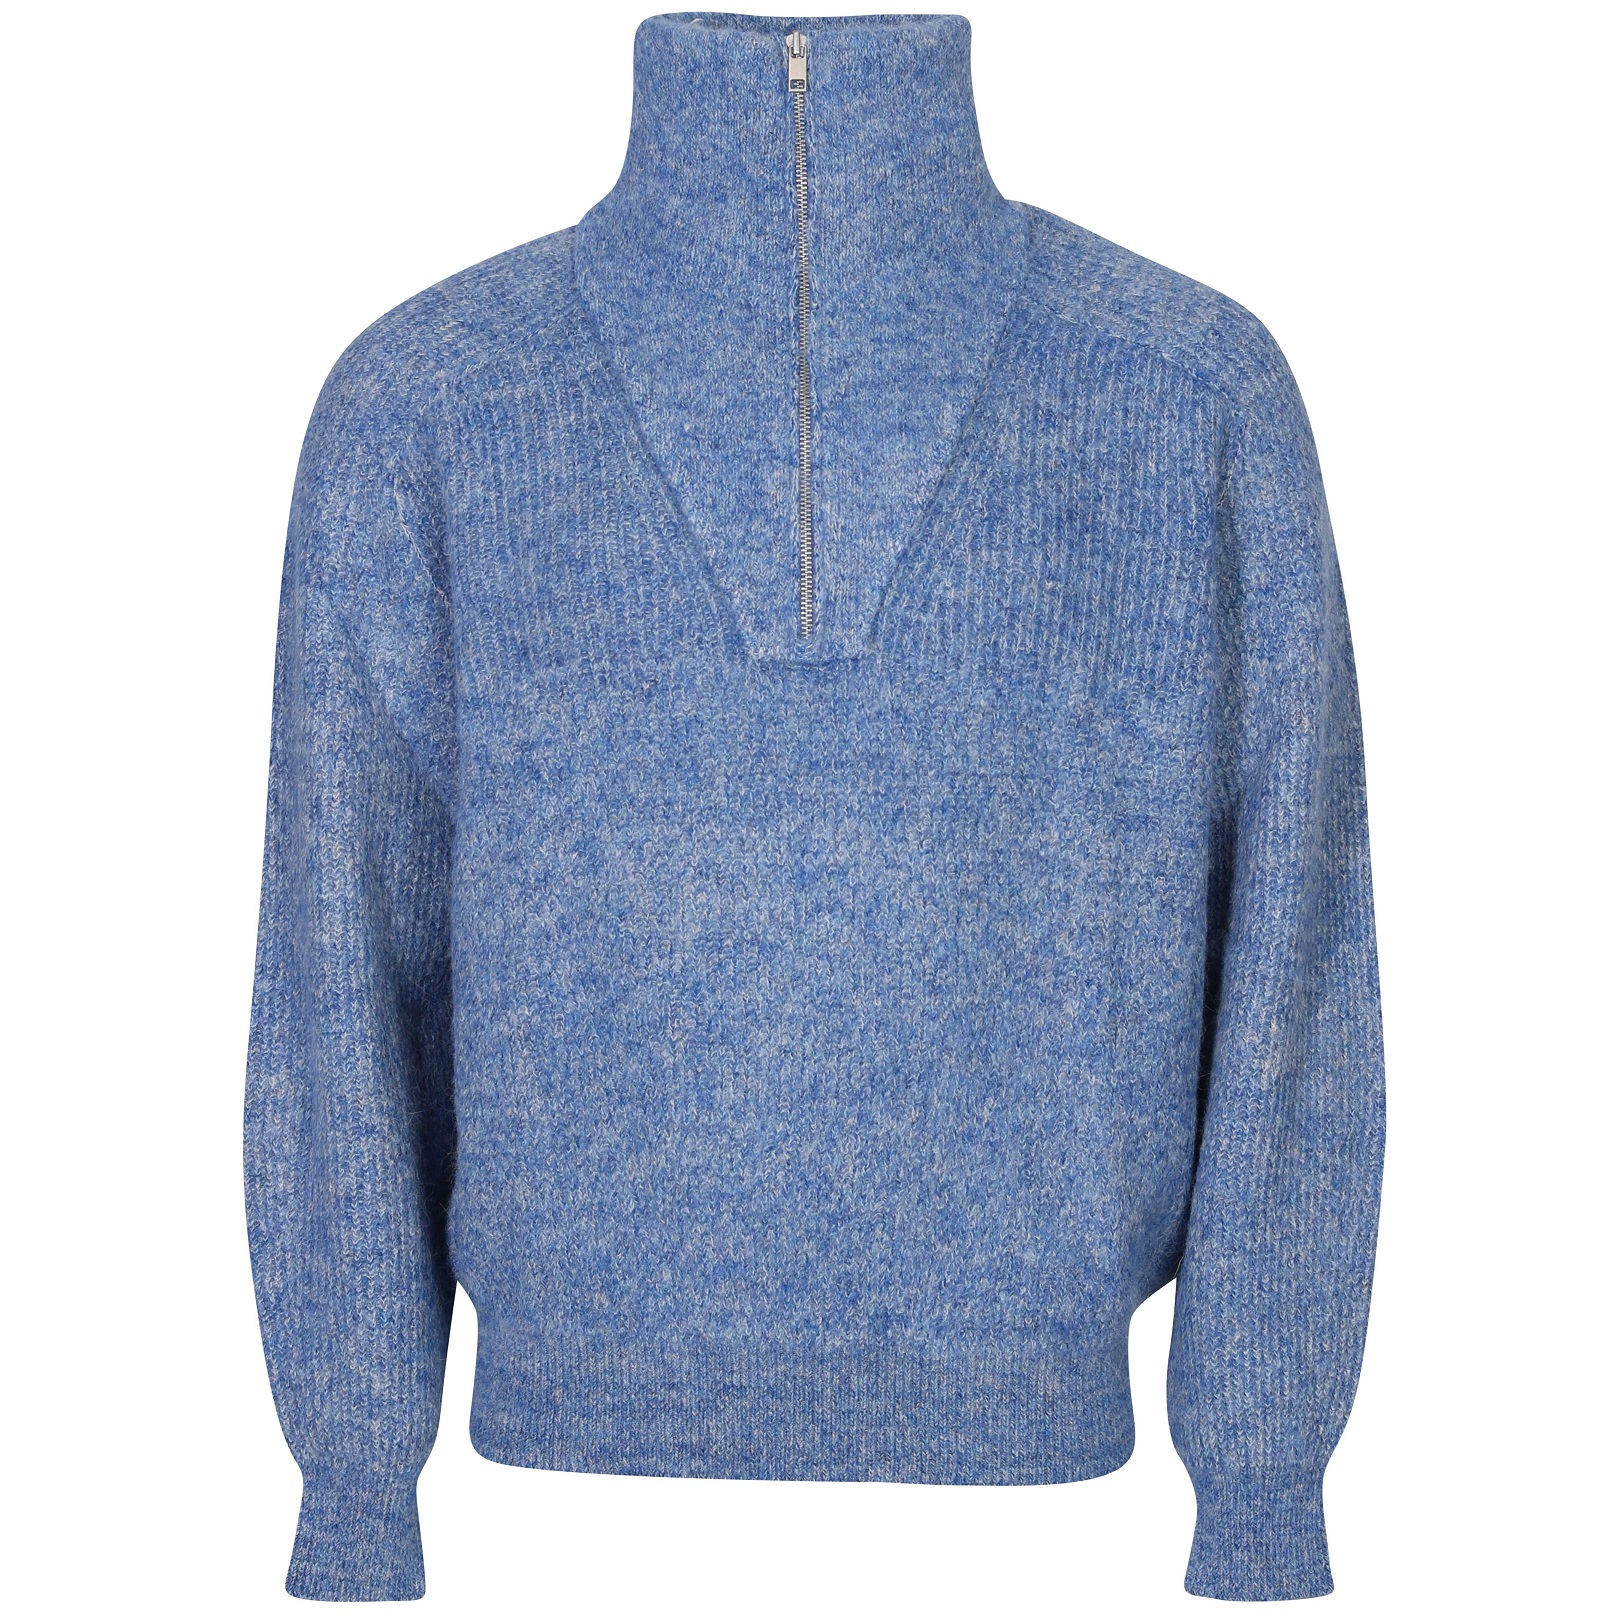 ISABEL MARANT Bryson Jumper Knit Pullover in Electric Blue